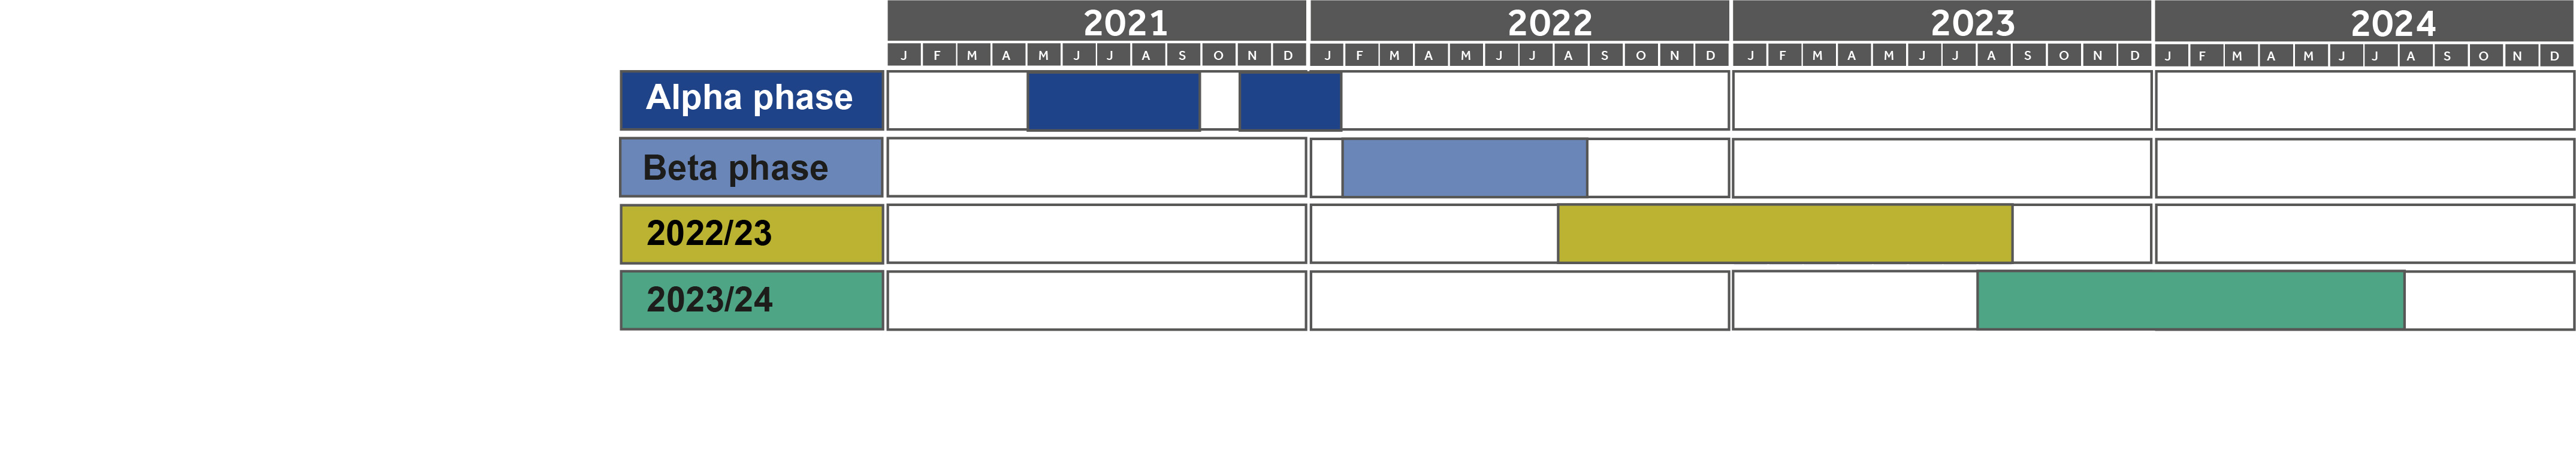 Data Futures timeline for Alpha phase, Beta phase, 2022/23 collection and 2023/24 collection